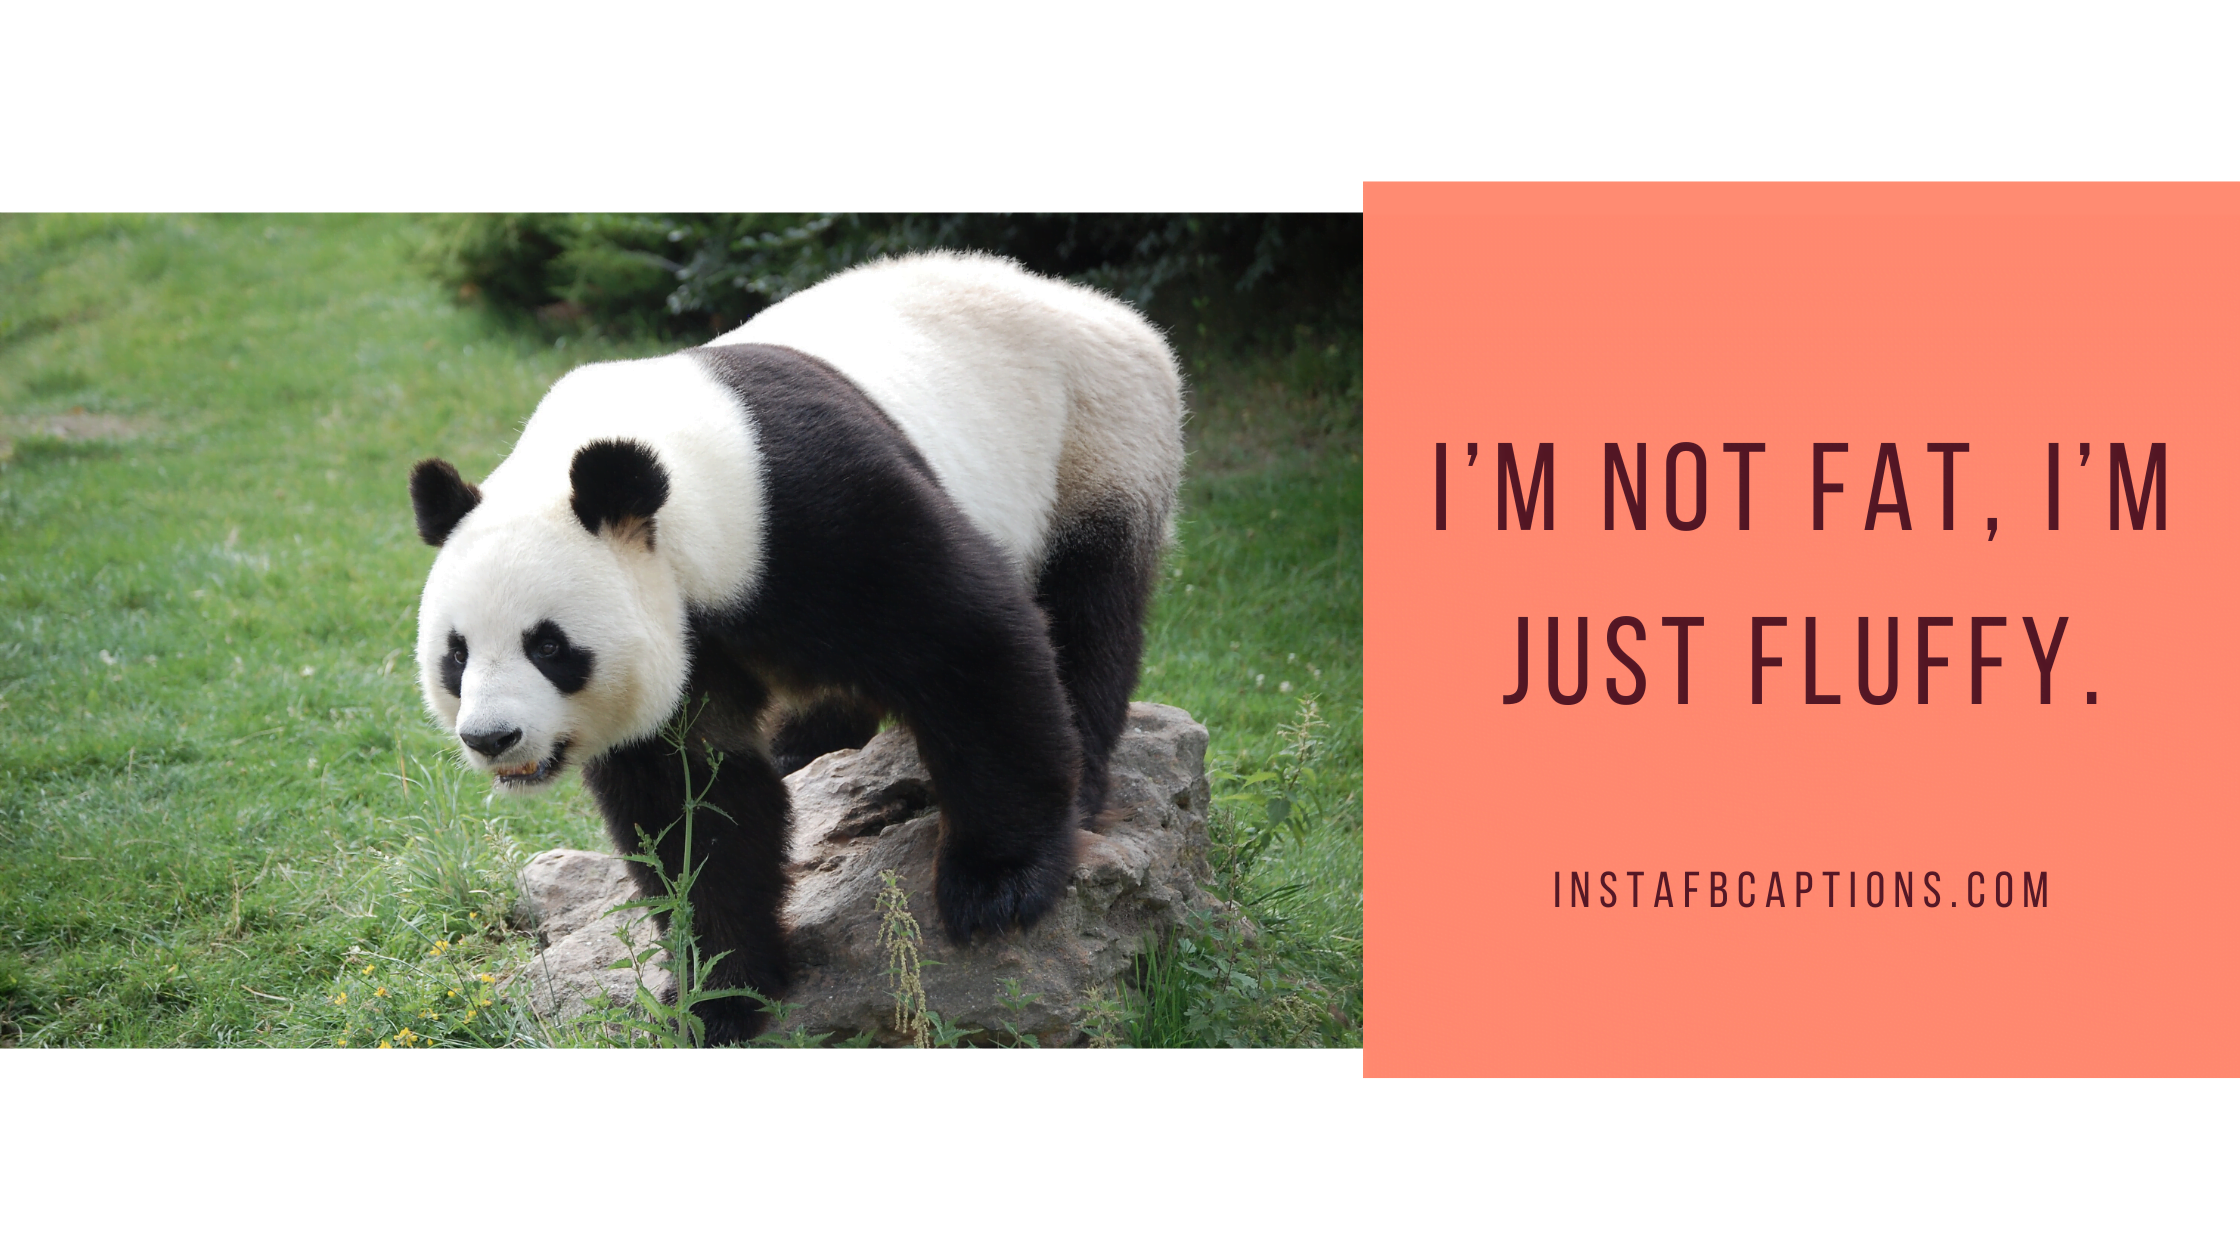 Funny Captions For Your Panda Captions  - Funny Captions for your Panda Captions - Panda Lover Captions for Instagram Pictures in 2022